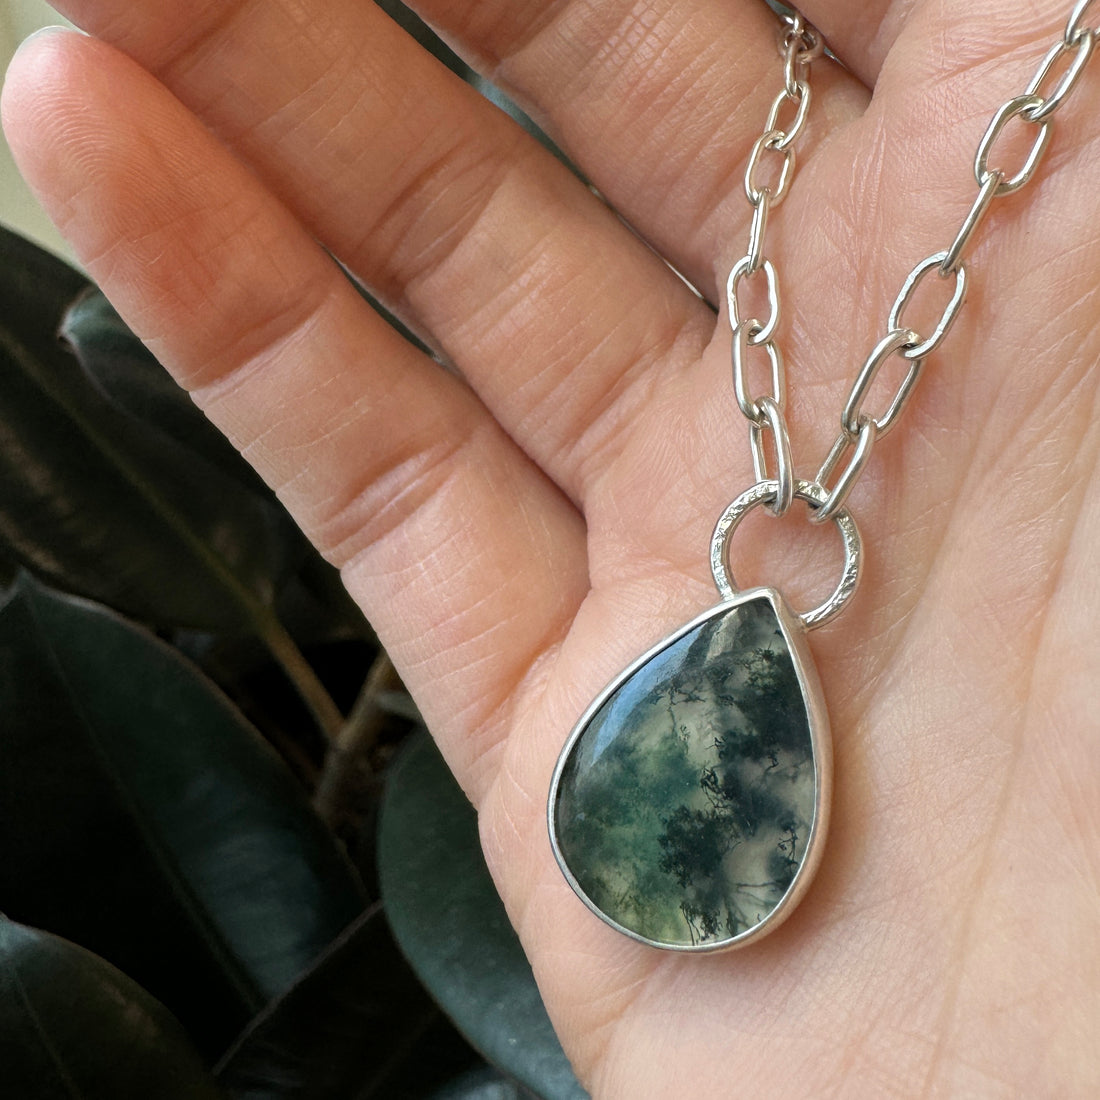 Balance Link Necklace - Moss Agate Teardrop - Bright Sterling